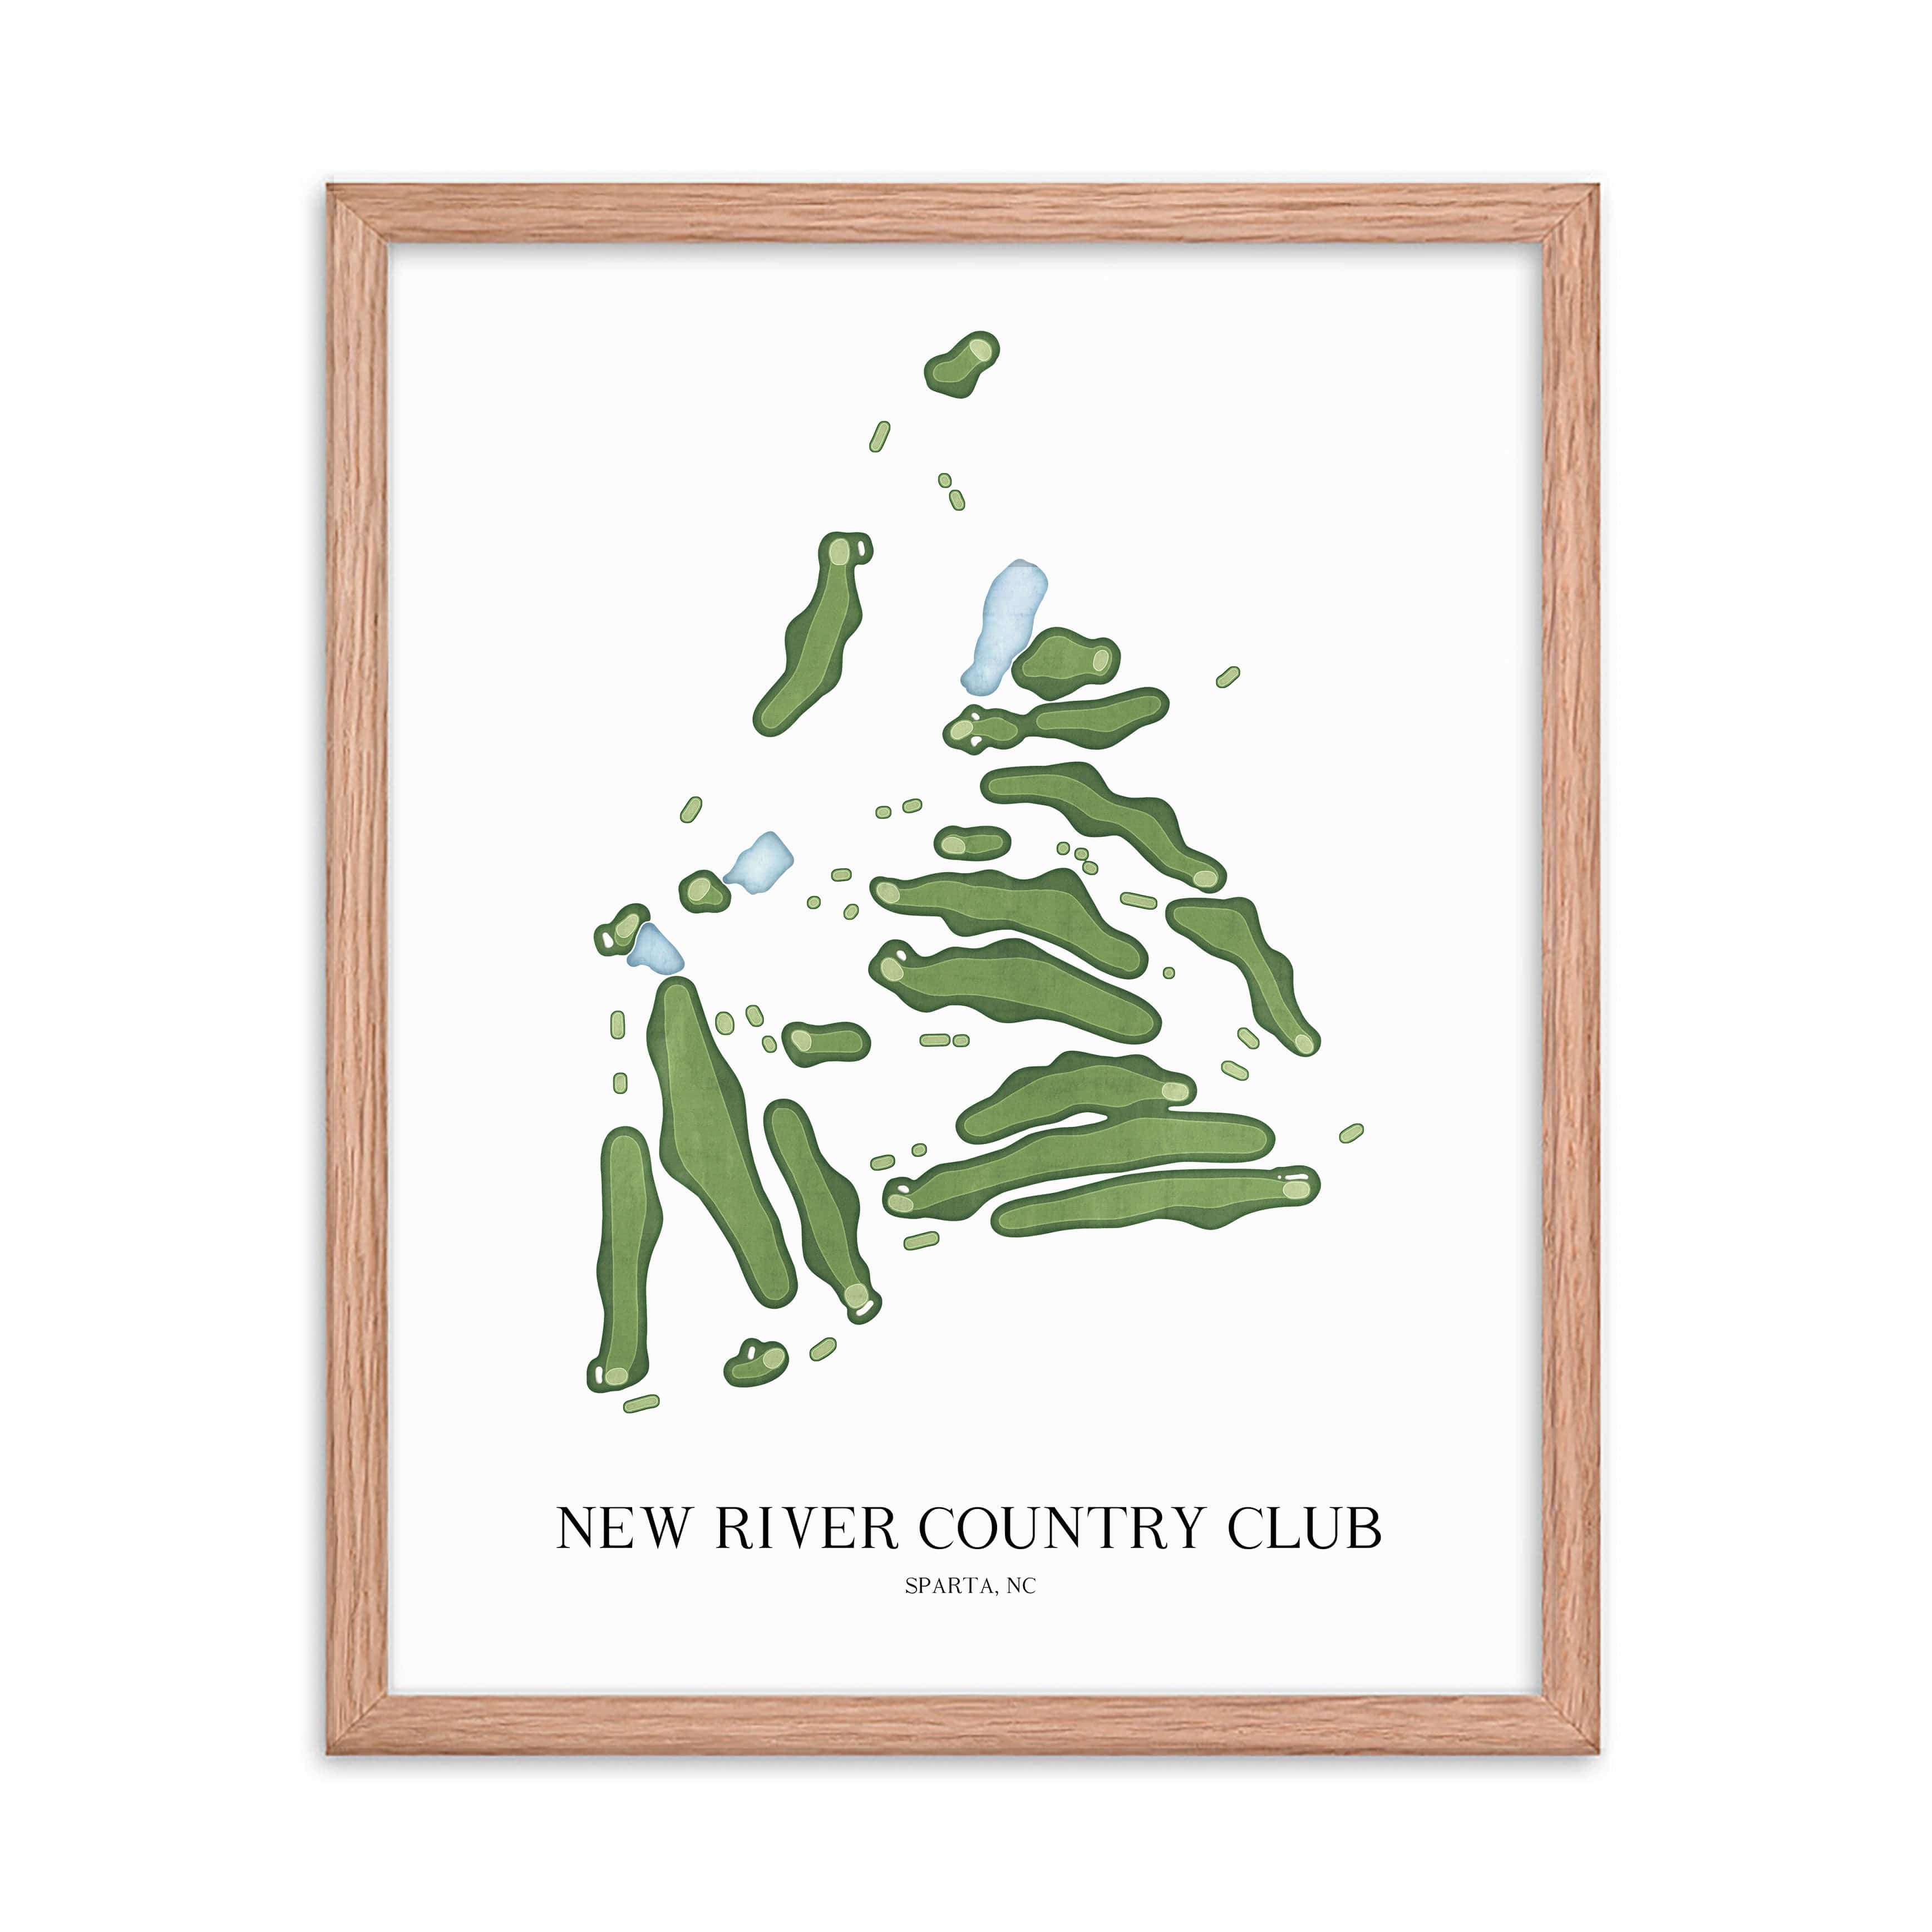 The 19th Hole Golf Shop - Golf Course Prints -  New River Country Club Golf Course Map